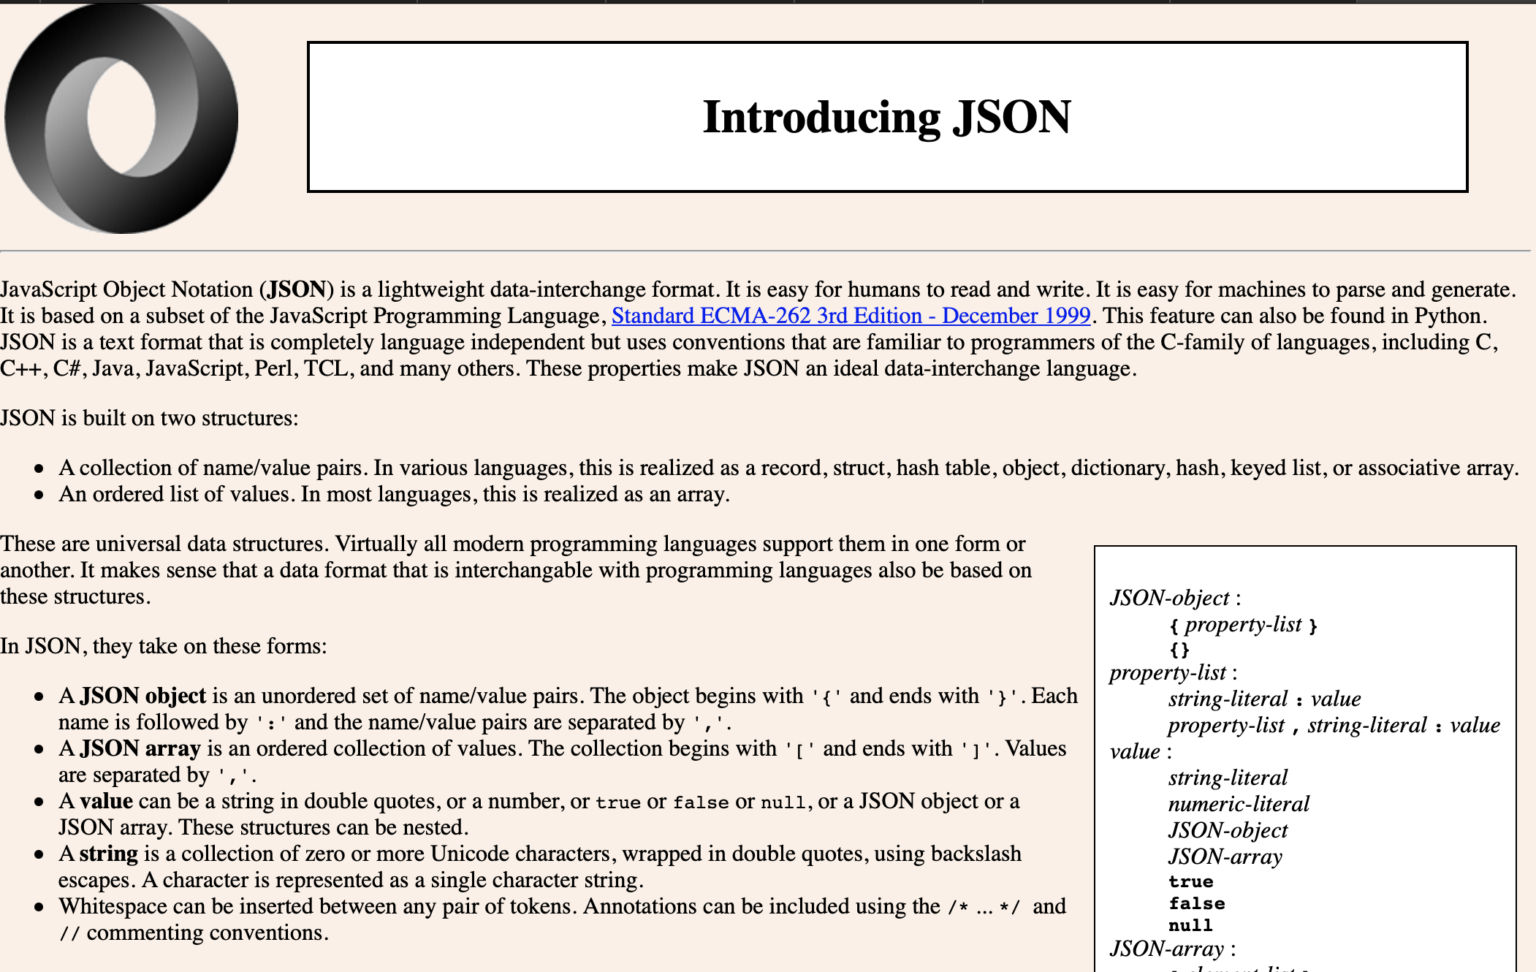 An early version of the JSON.org homepage, which described the spec